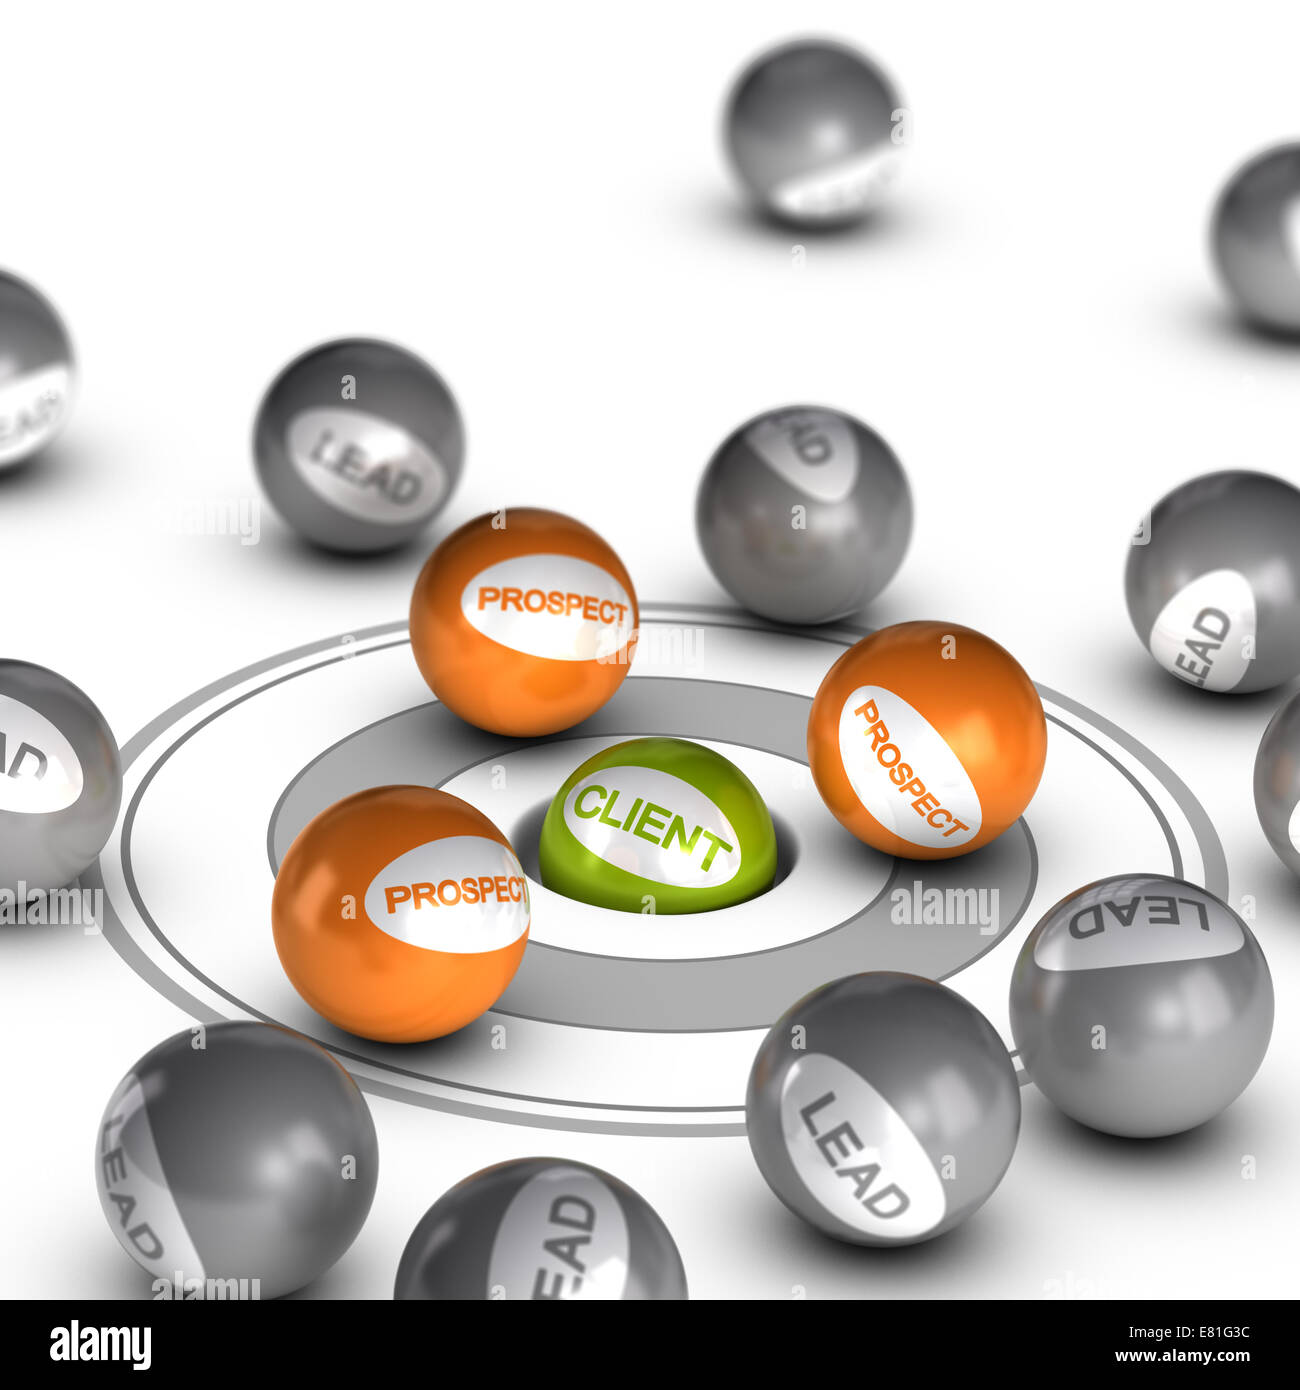 Spheres with text lead, prospect and client. Concept image to illustrate lead conversion. Stock Photo